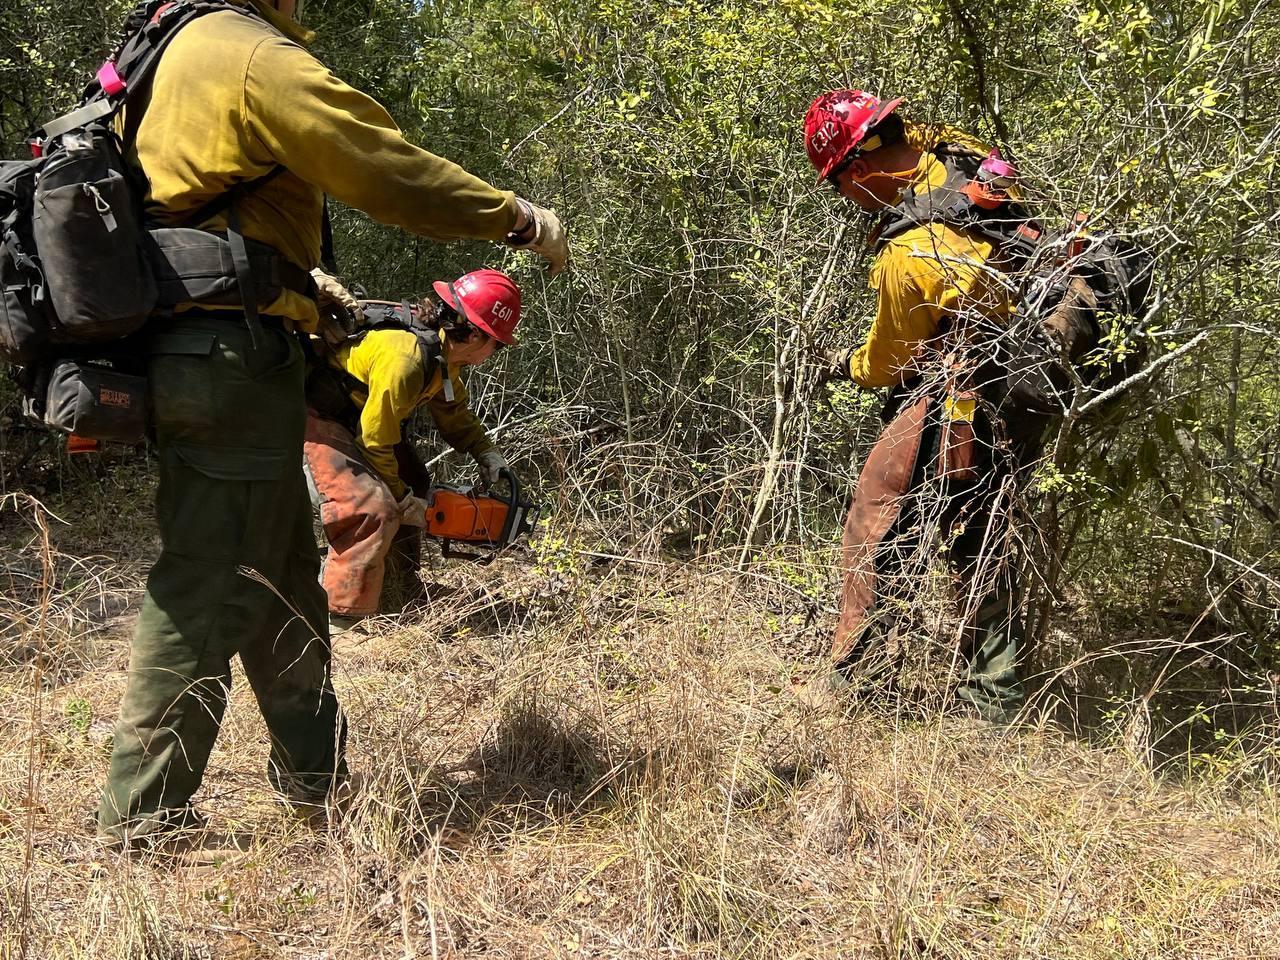 1 firefighter uses a chainsaw to cut vegetation while 2 other firefighters remove the cut vegetation and move it out of the way.